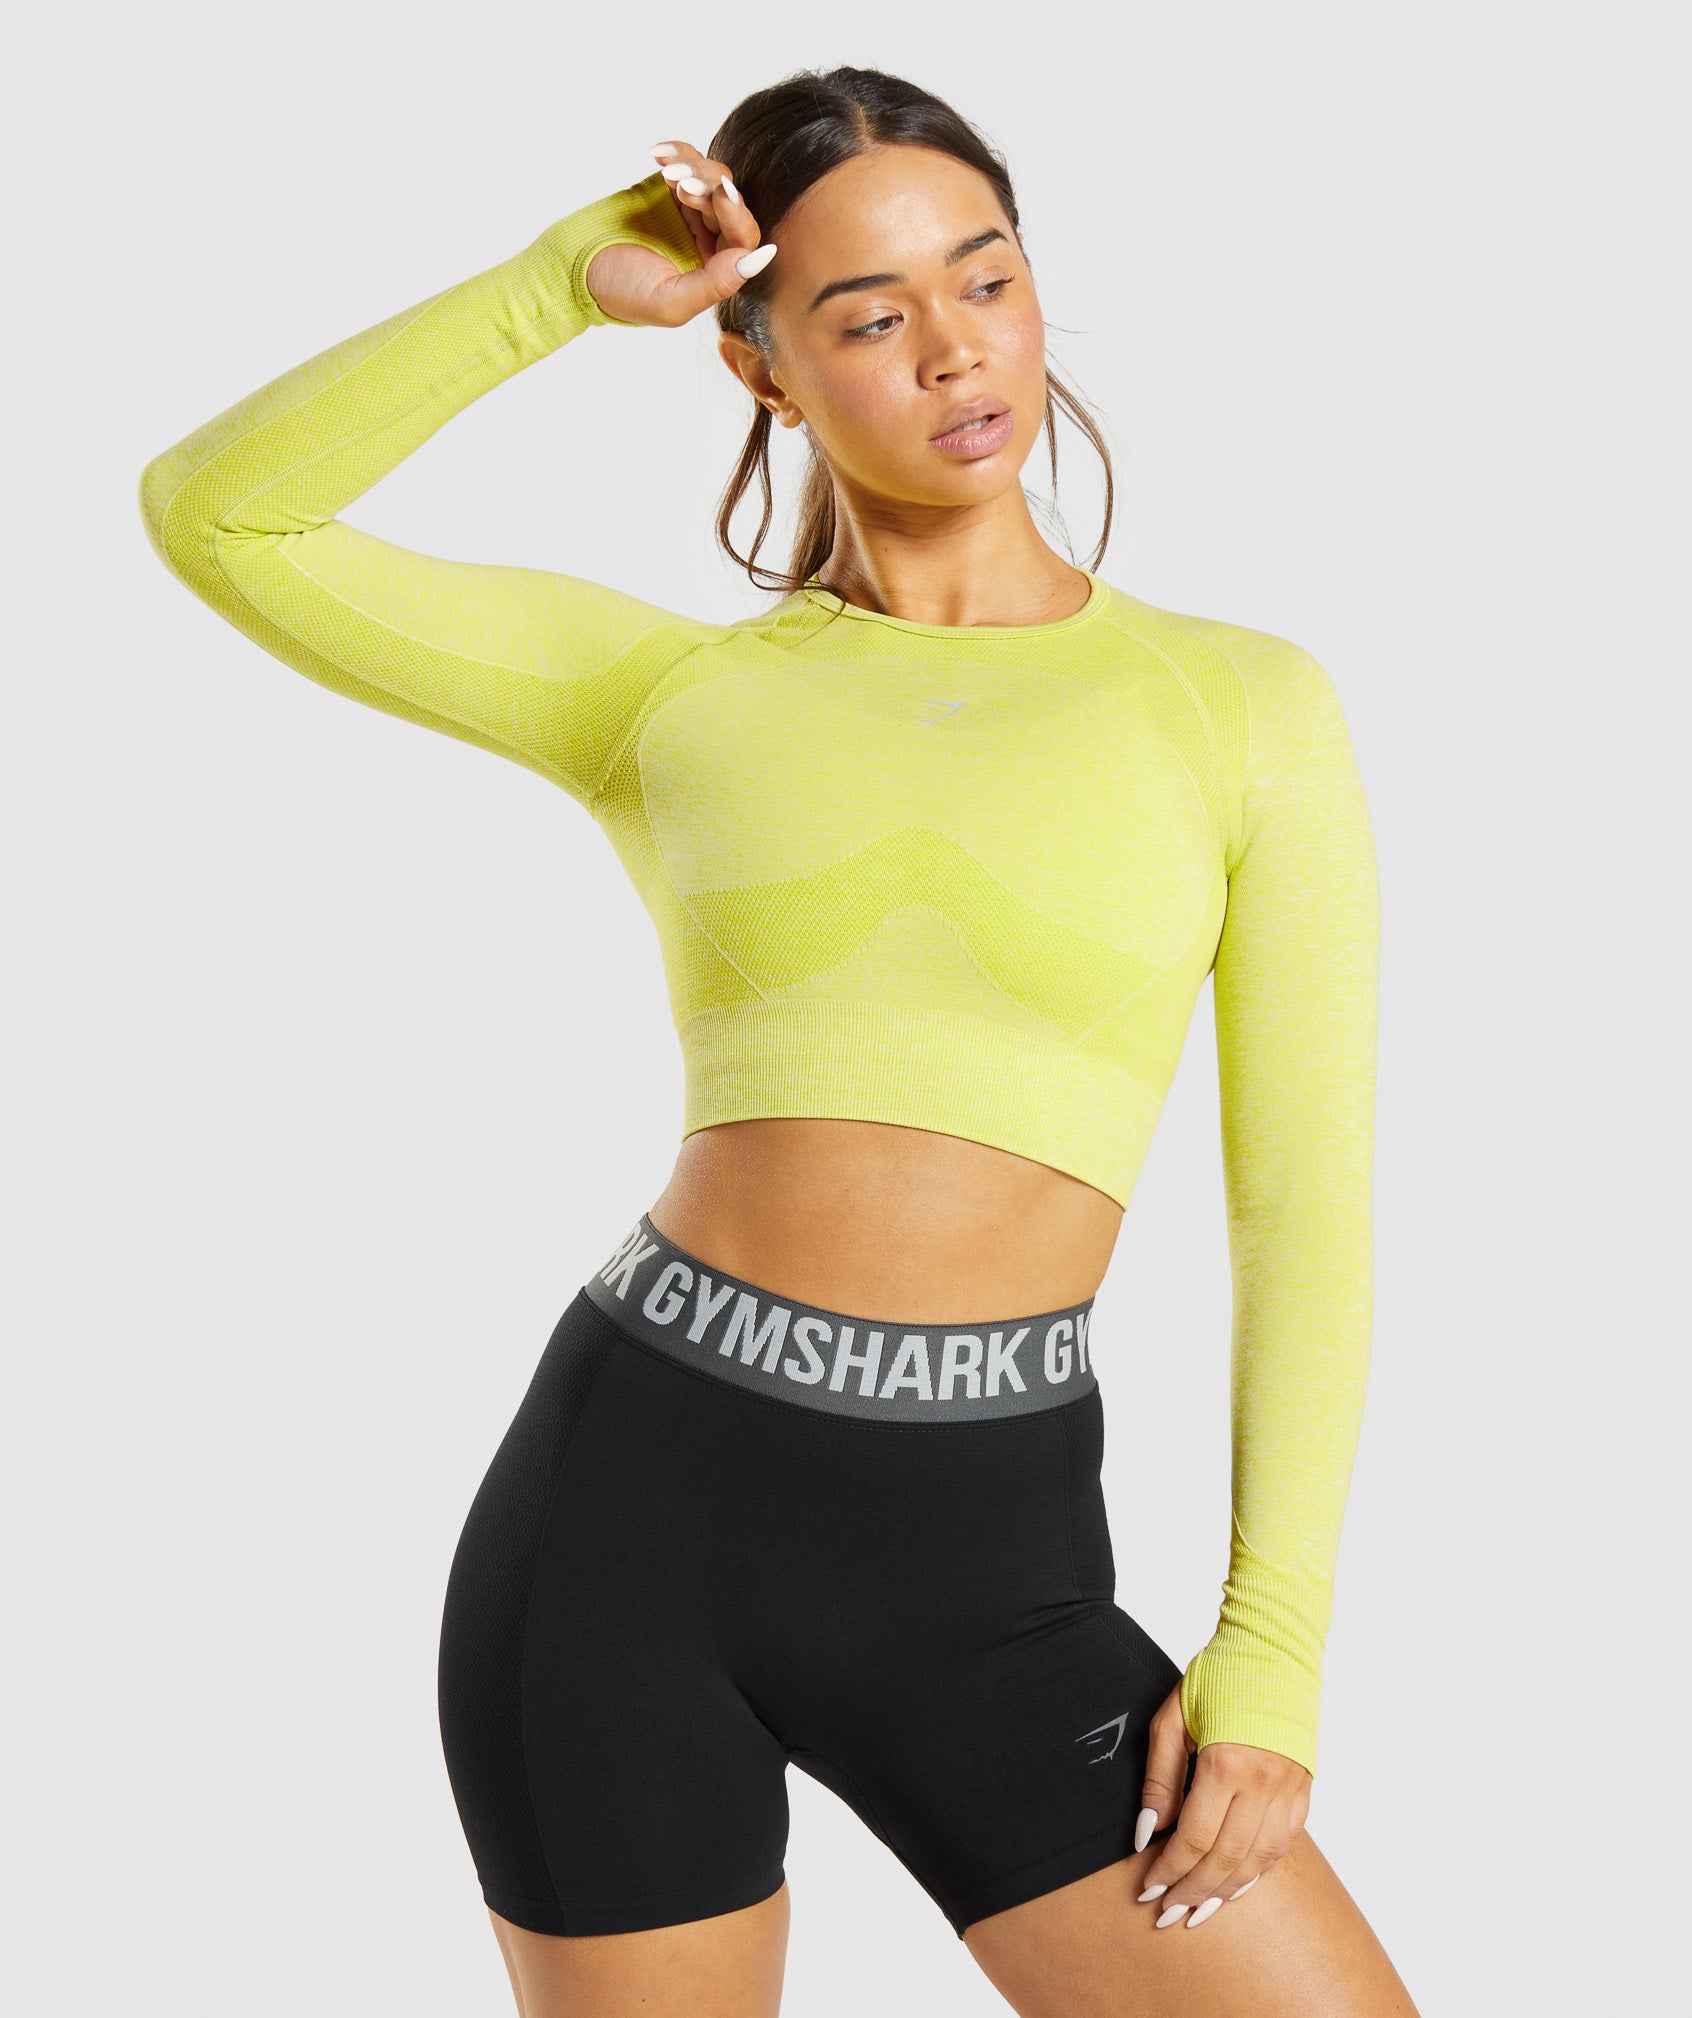 Butterluxe Long Sleeve Crop Tops For Women Slim Fit Workout Shirts Cropped  Athletic Gym Top High Visibility Yellow Small